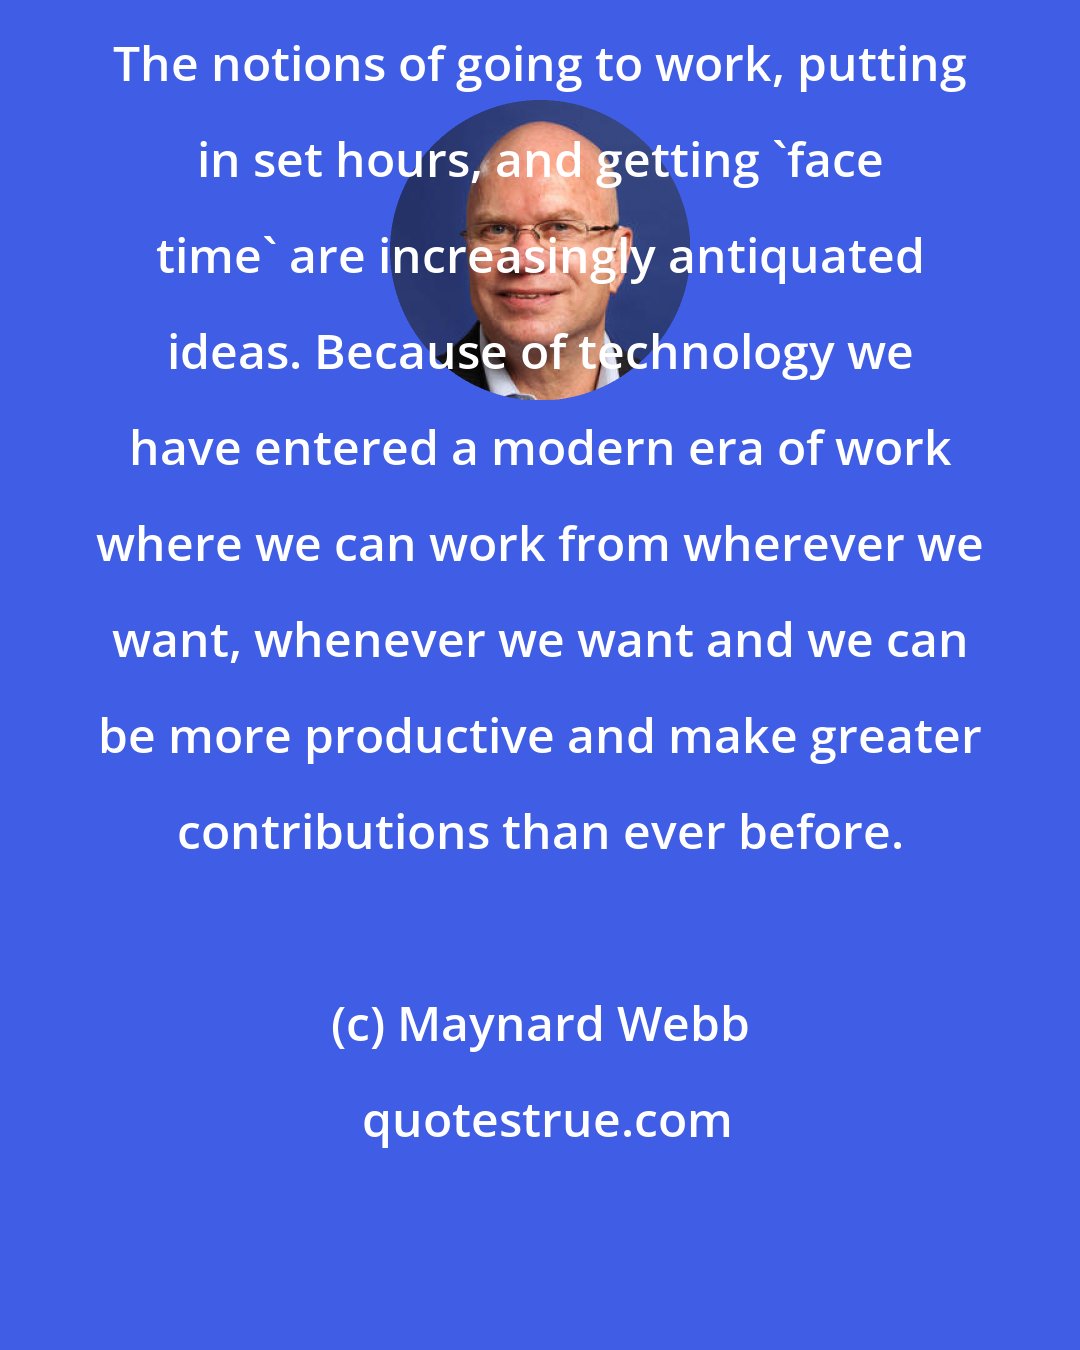 Maynard Webb: The notions of going to work, putting in set hours, and getting 'face time' are increasingly antiquated ideas. Because of technology we have entered a modern era of work where we can work from wherever we want, whenever we want and we can be more productive and make greater contributions than ever before.